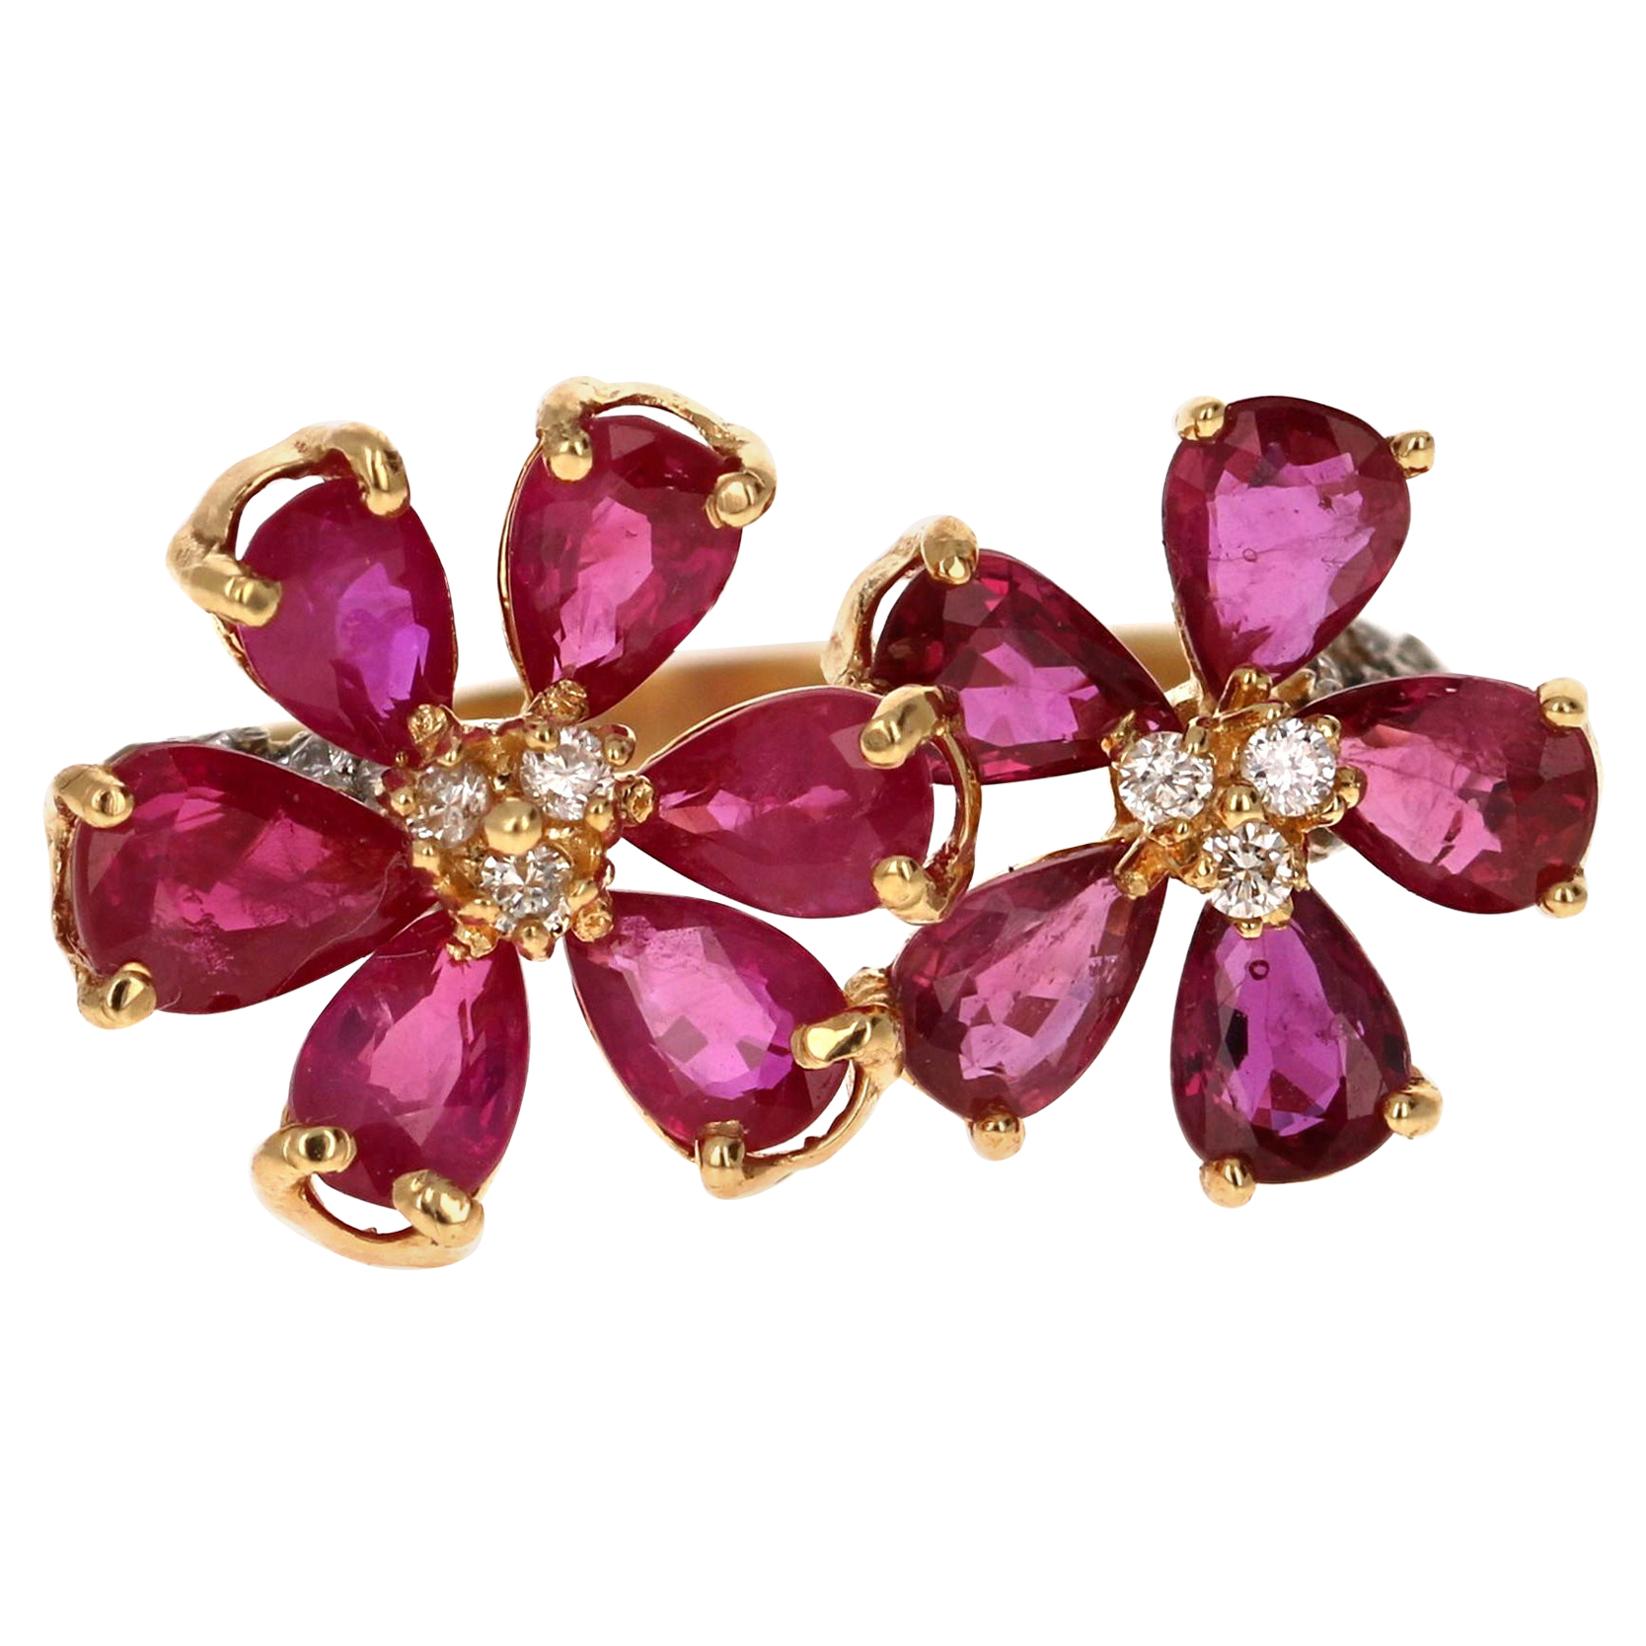 This charming Ruby Diamond Yellow Gold Ring is a modern cocktail ring that is sure to get a lot of attention with its unusual flow and design. 

There are 11 Natural Pear Cut Burmese Rubies that weigh a total of 3.12 Carats.  The Rubies are accented